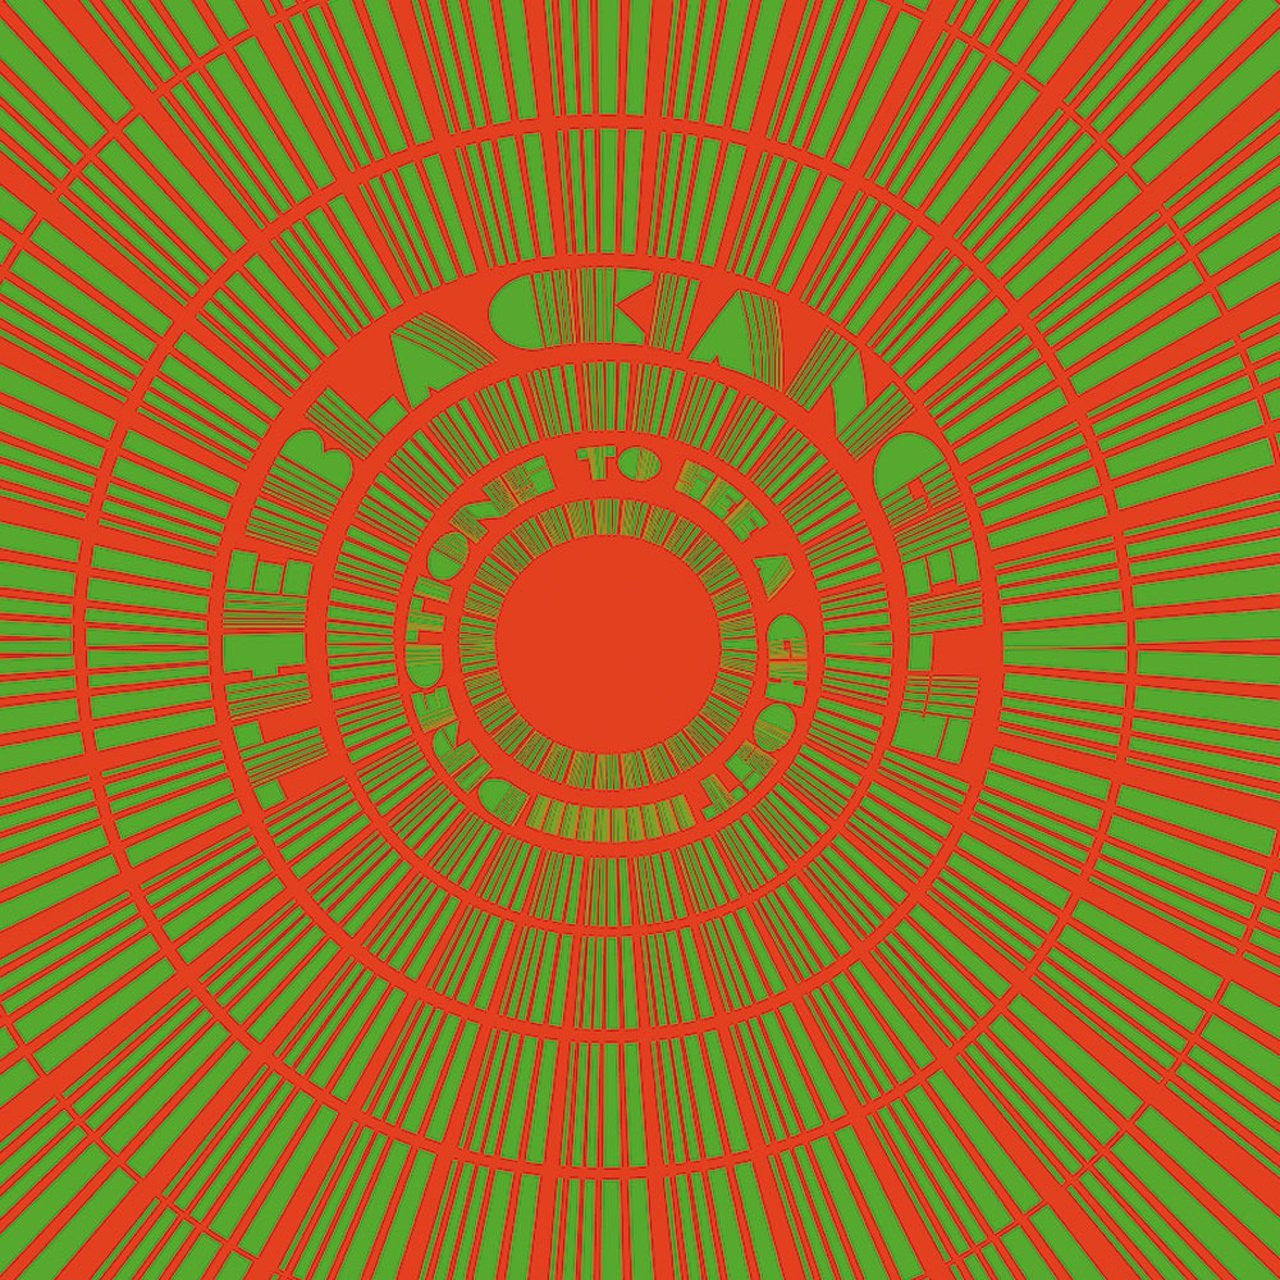 Black Angels - Directions To See A Ghost (3 LP)